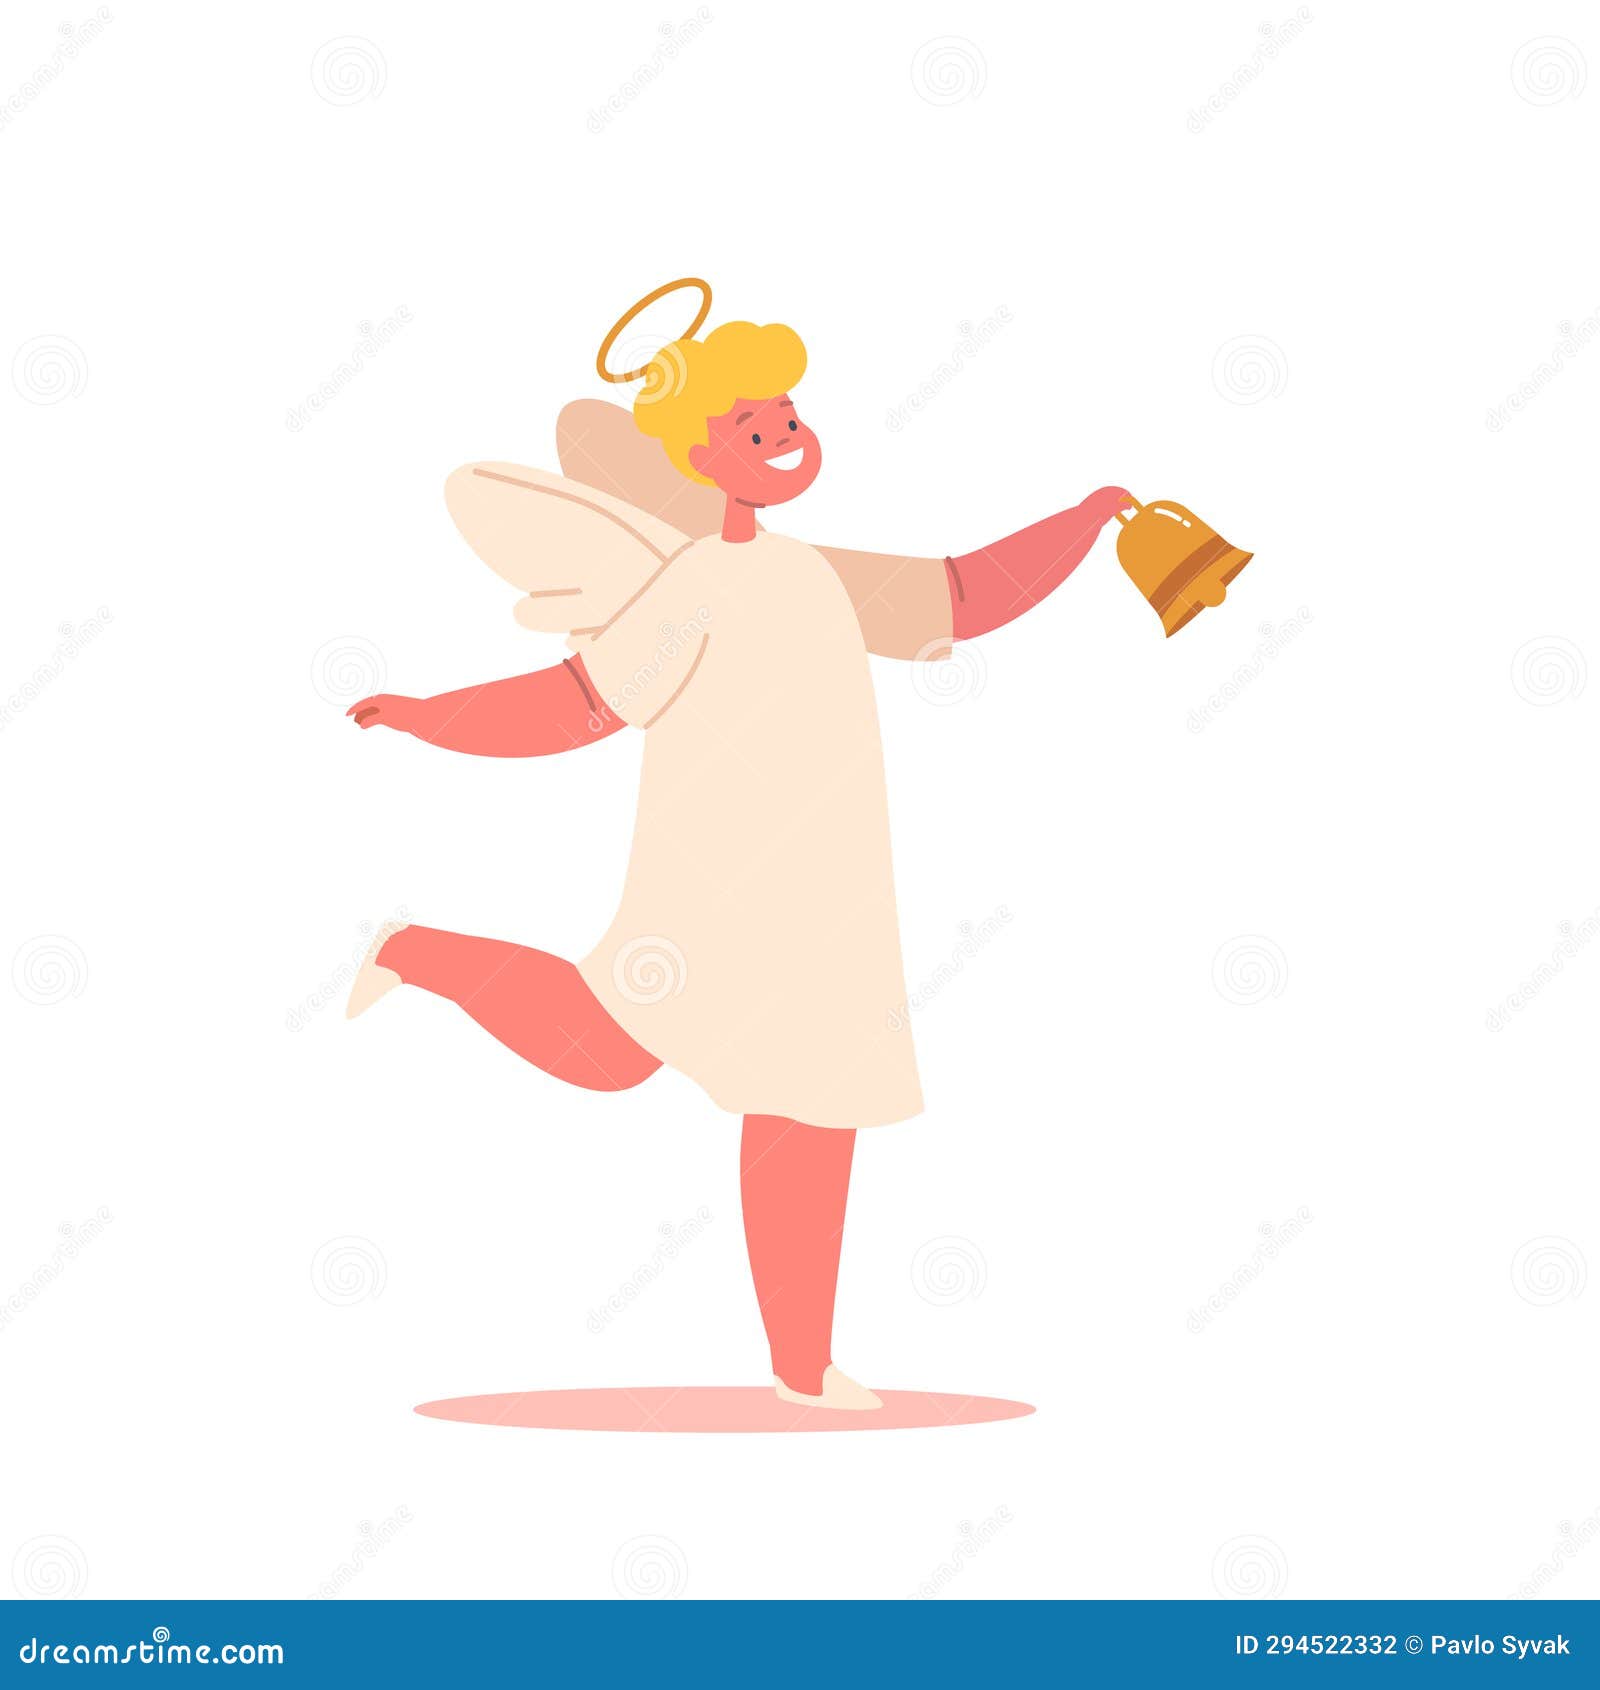 sweet, cherubic angel with rosy cheeks, halo and a gentle smile, ringing a golden bell. cute kawaii character spread joy